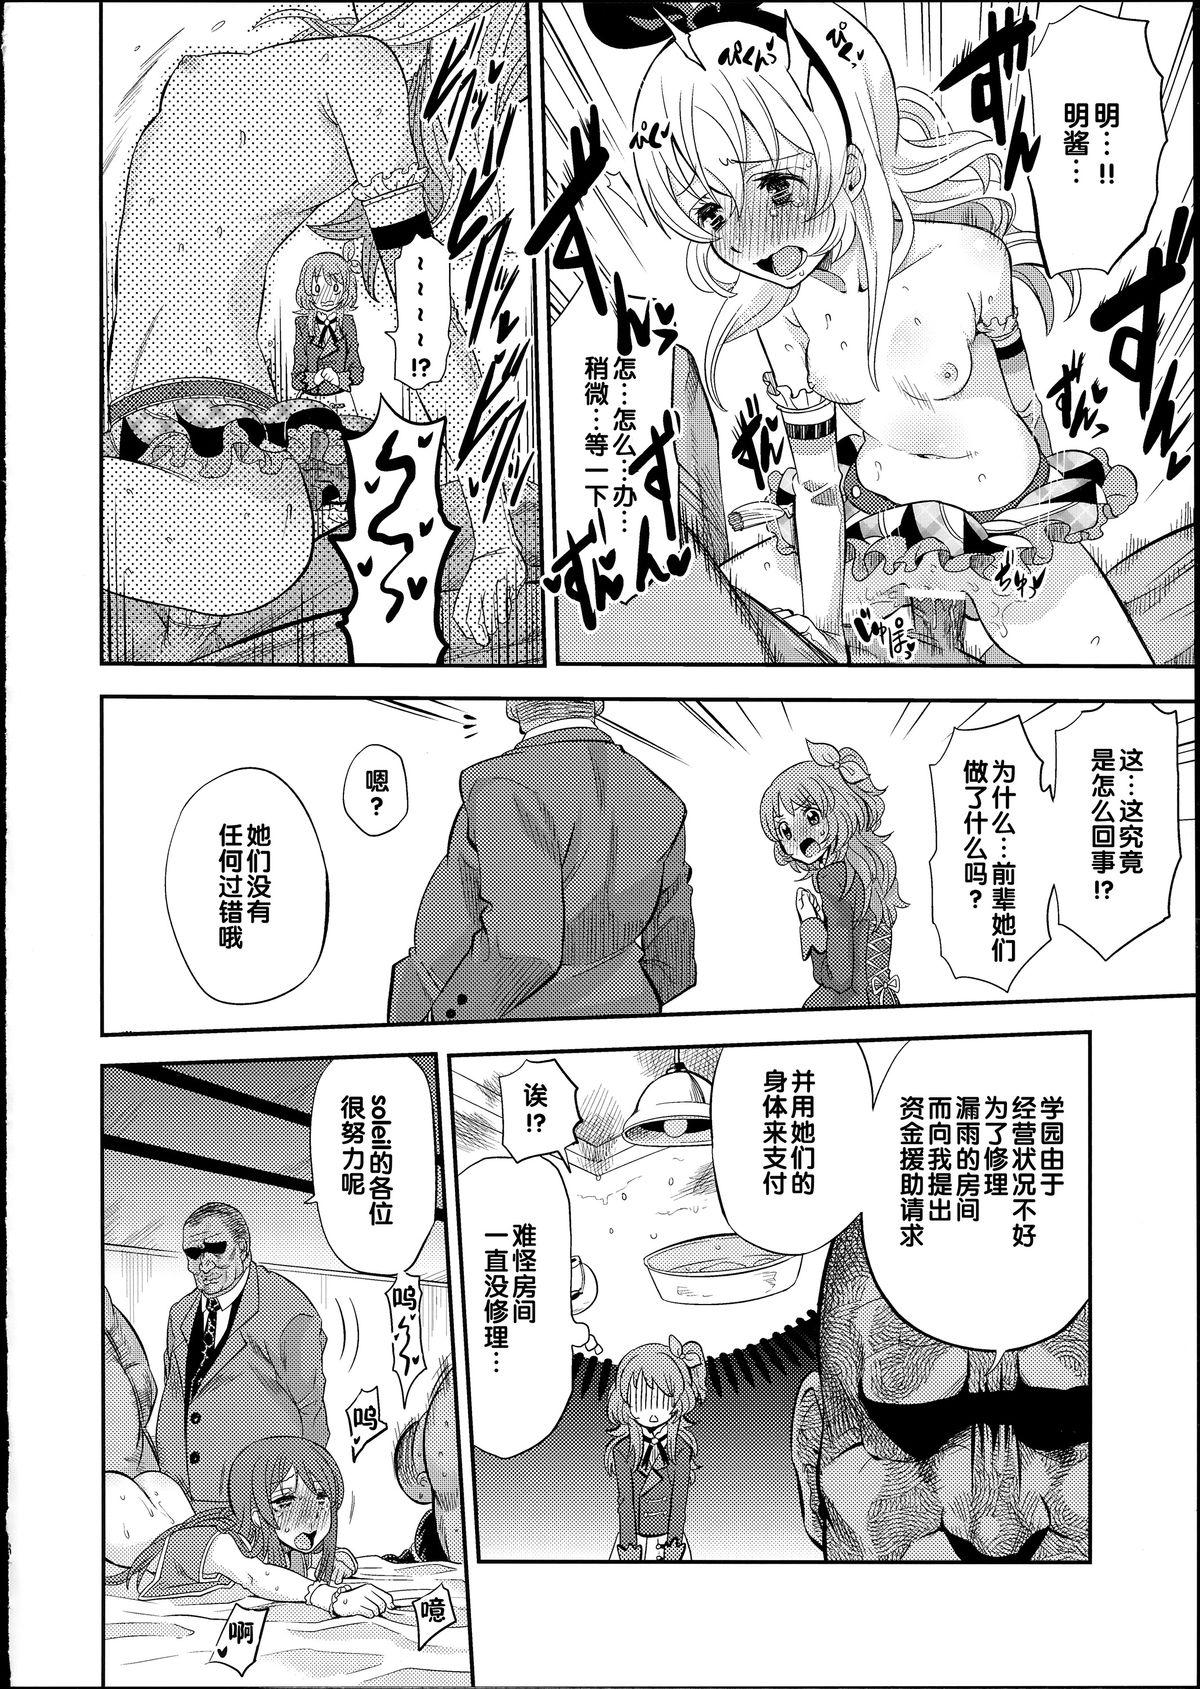 Horny IT WAS A good EXPERiENCE - Aikatsu Gaystraight - Page 6